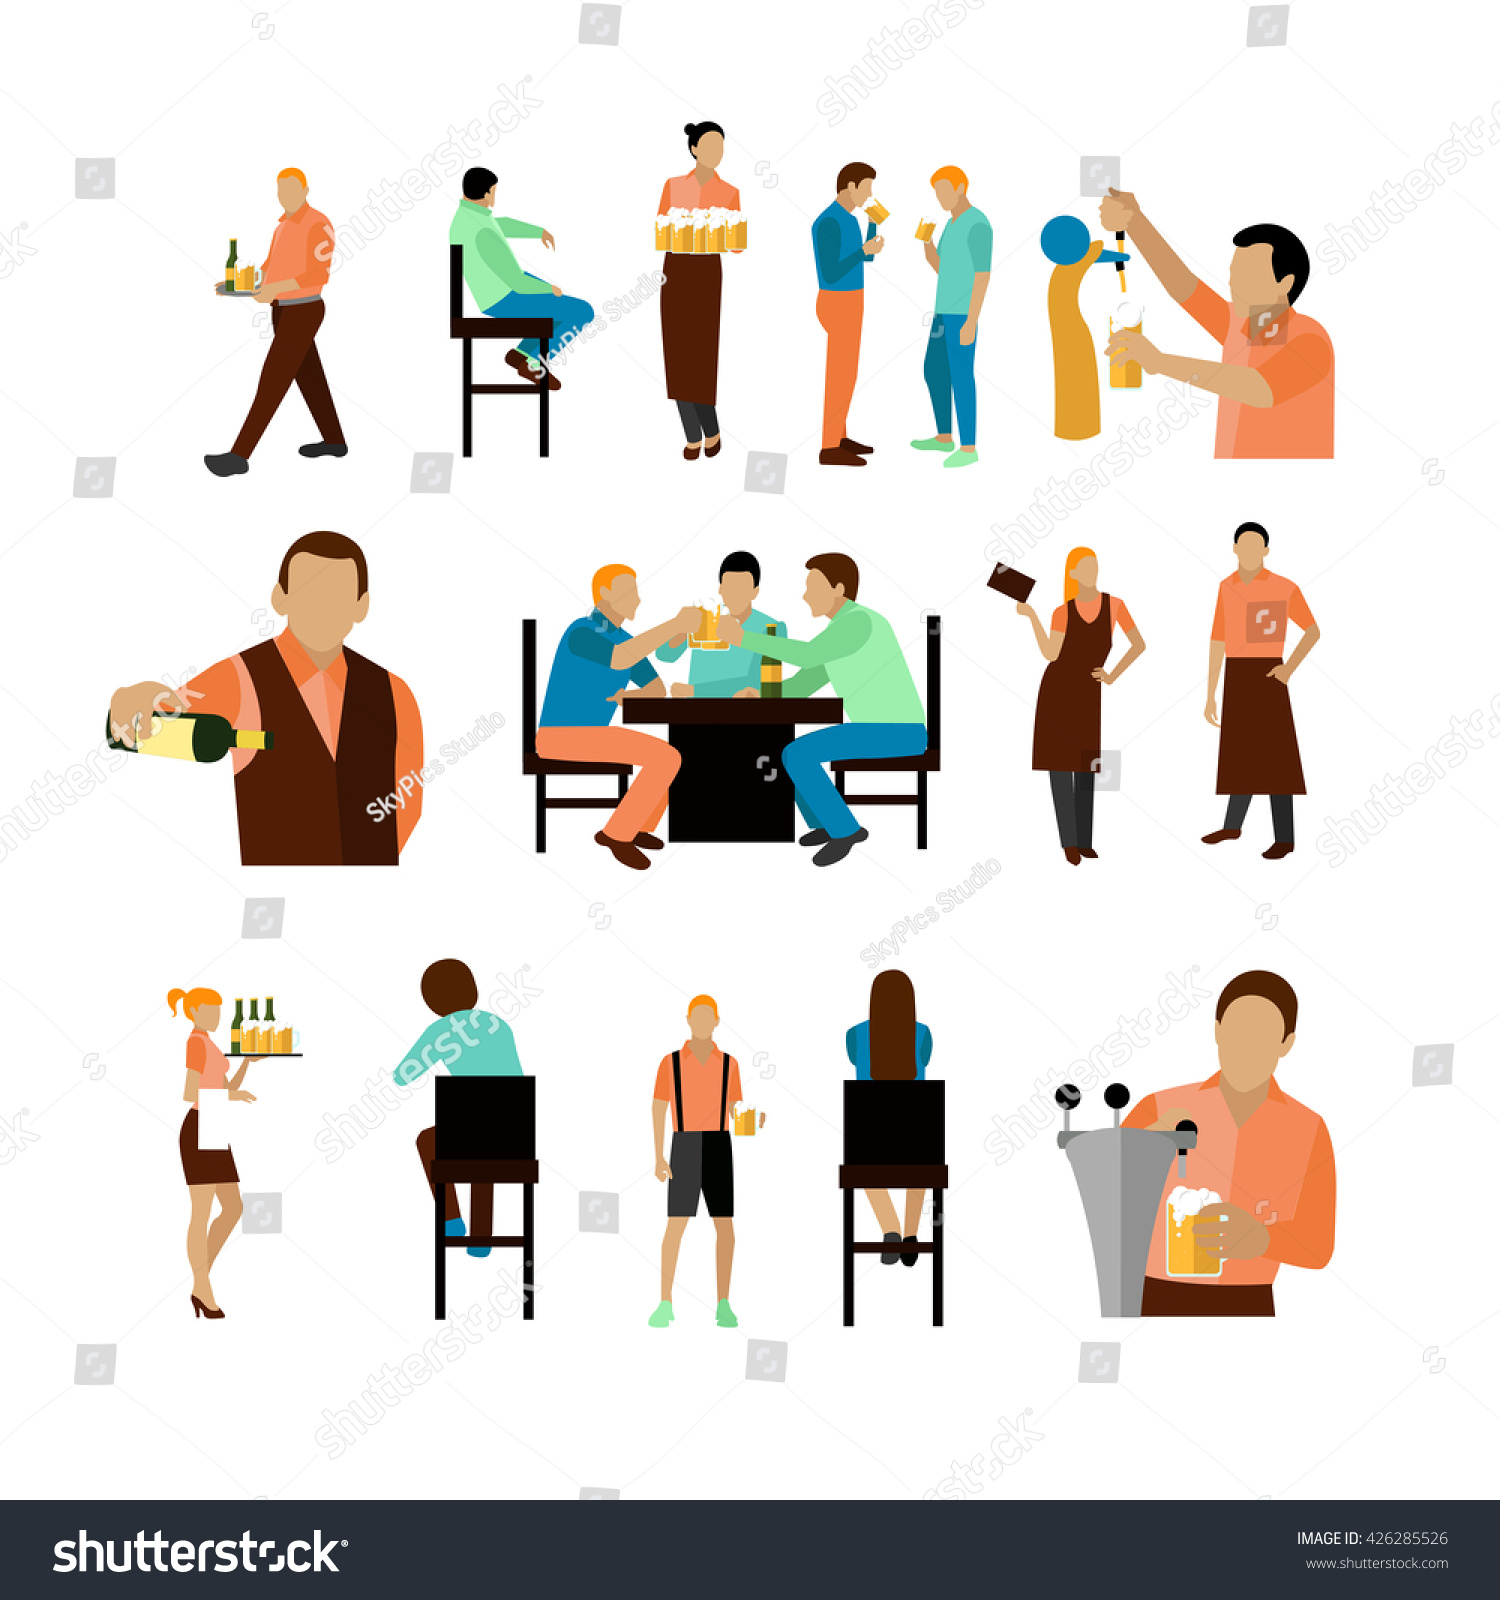 restaurant workers clipart - photo #16